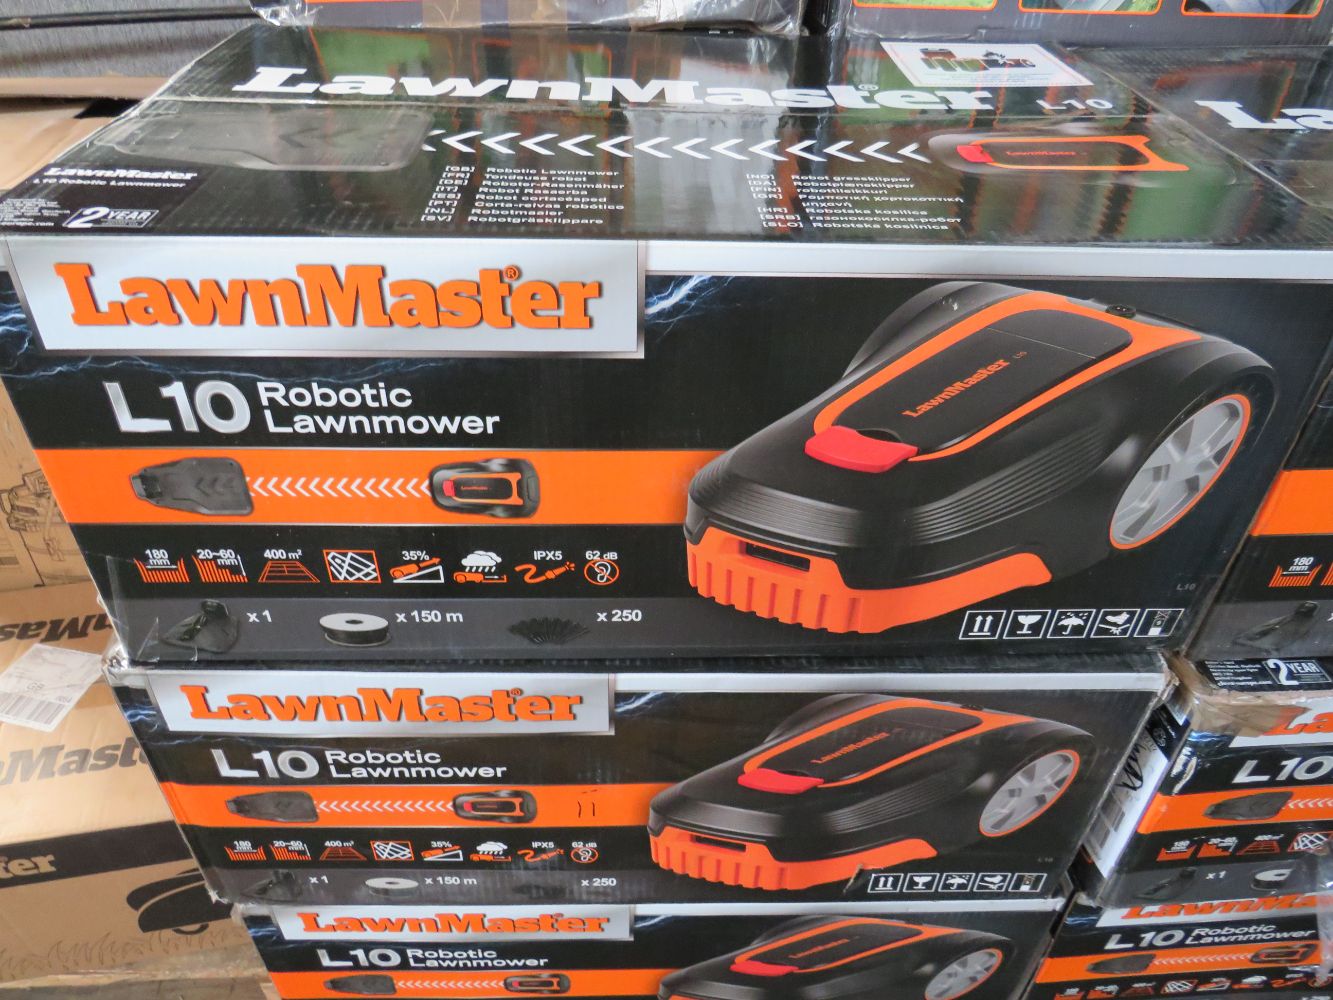 Lawn master robot lawn mowers and more